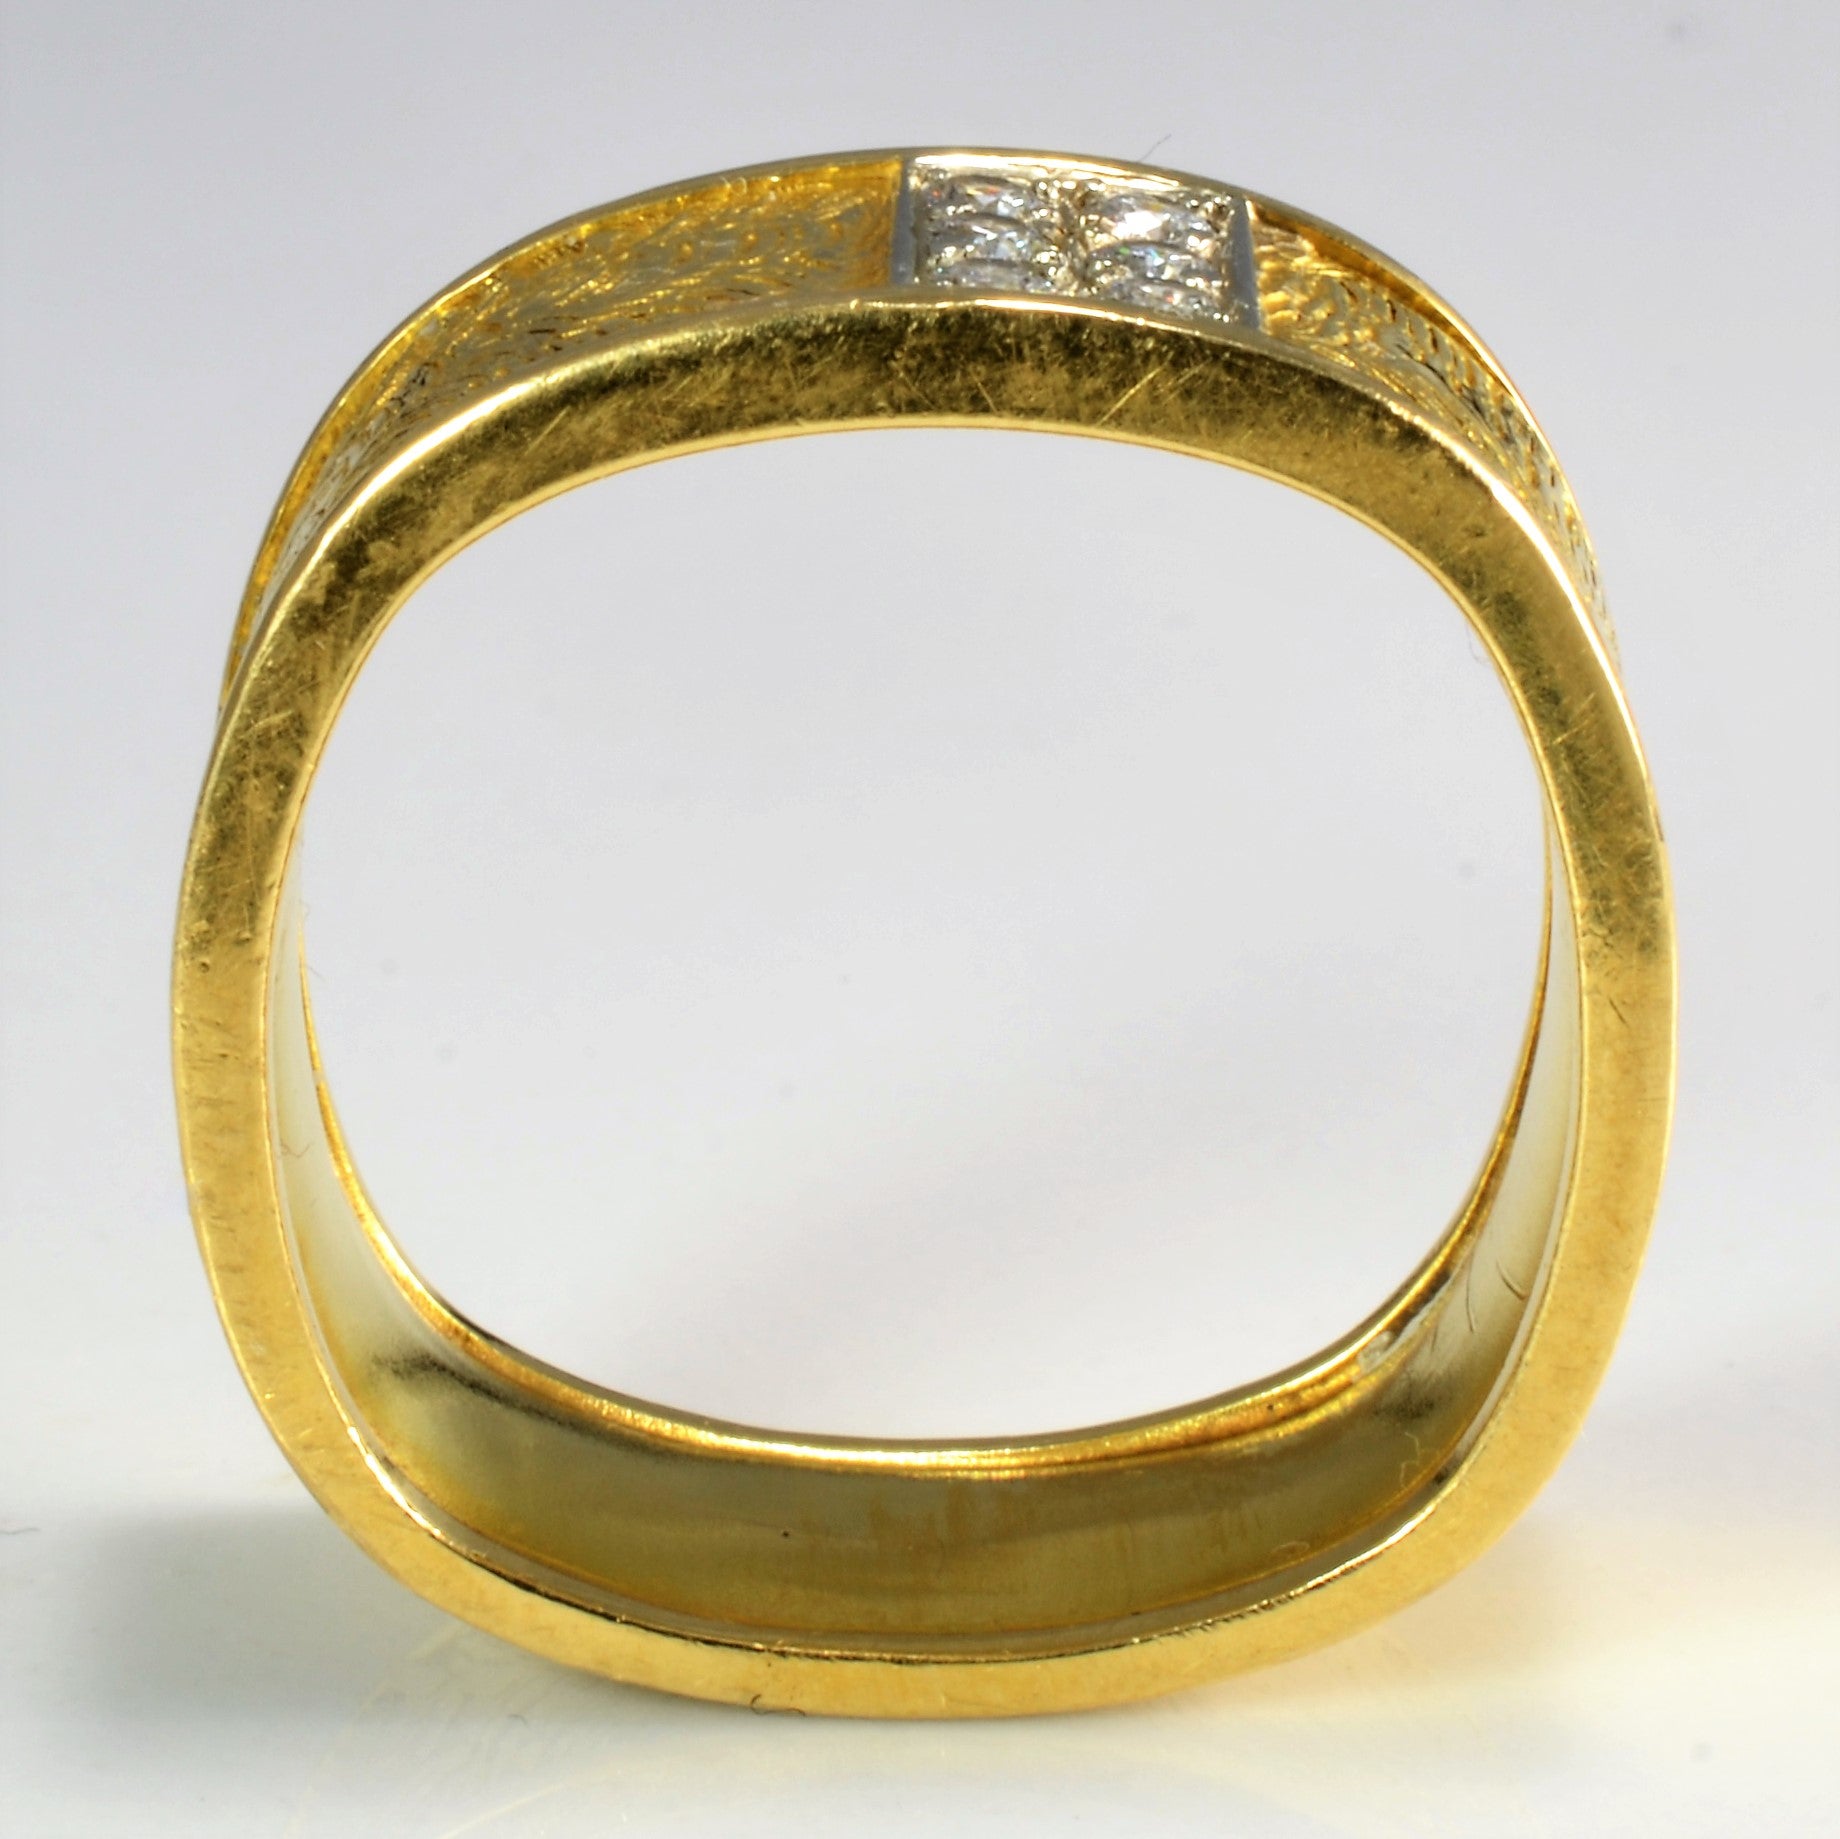 Cluster Diamond Wide Band Ring | 0.18 ctw, SZ 9.5 |